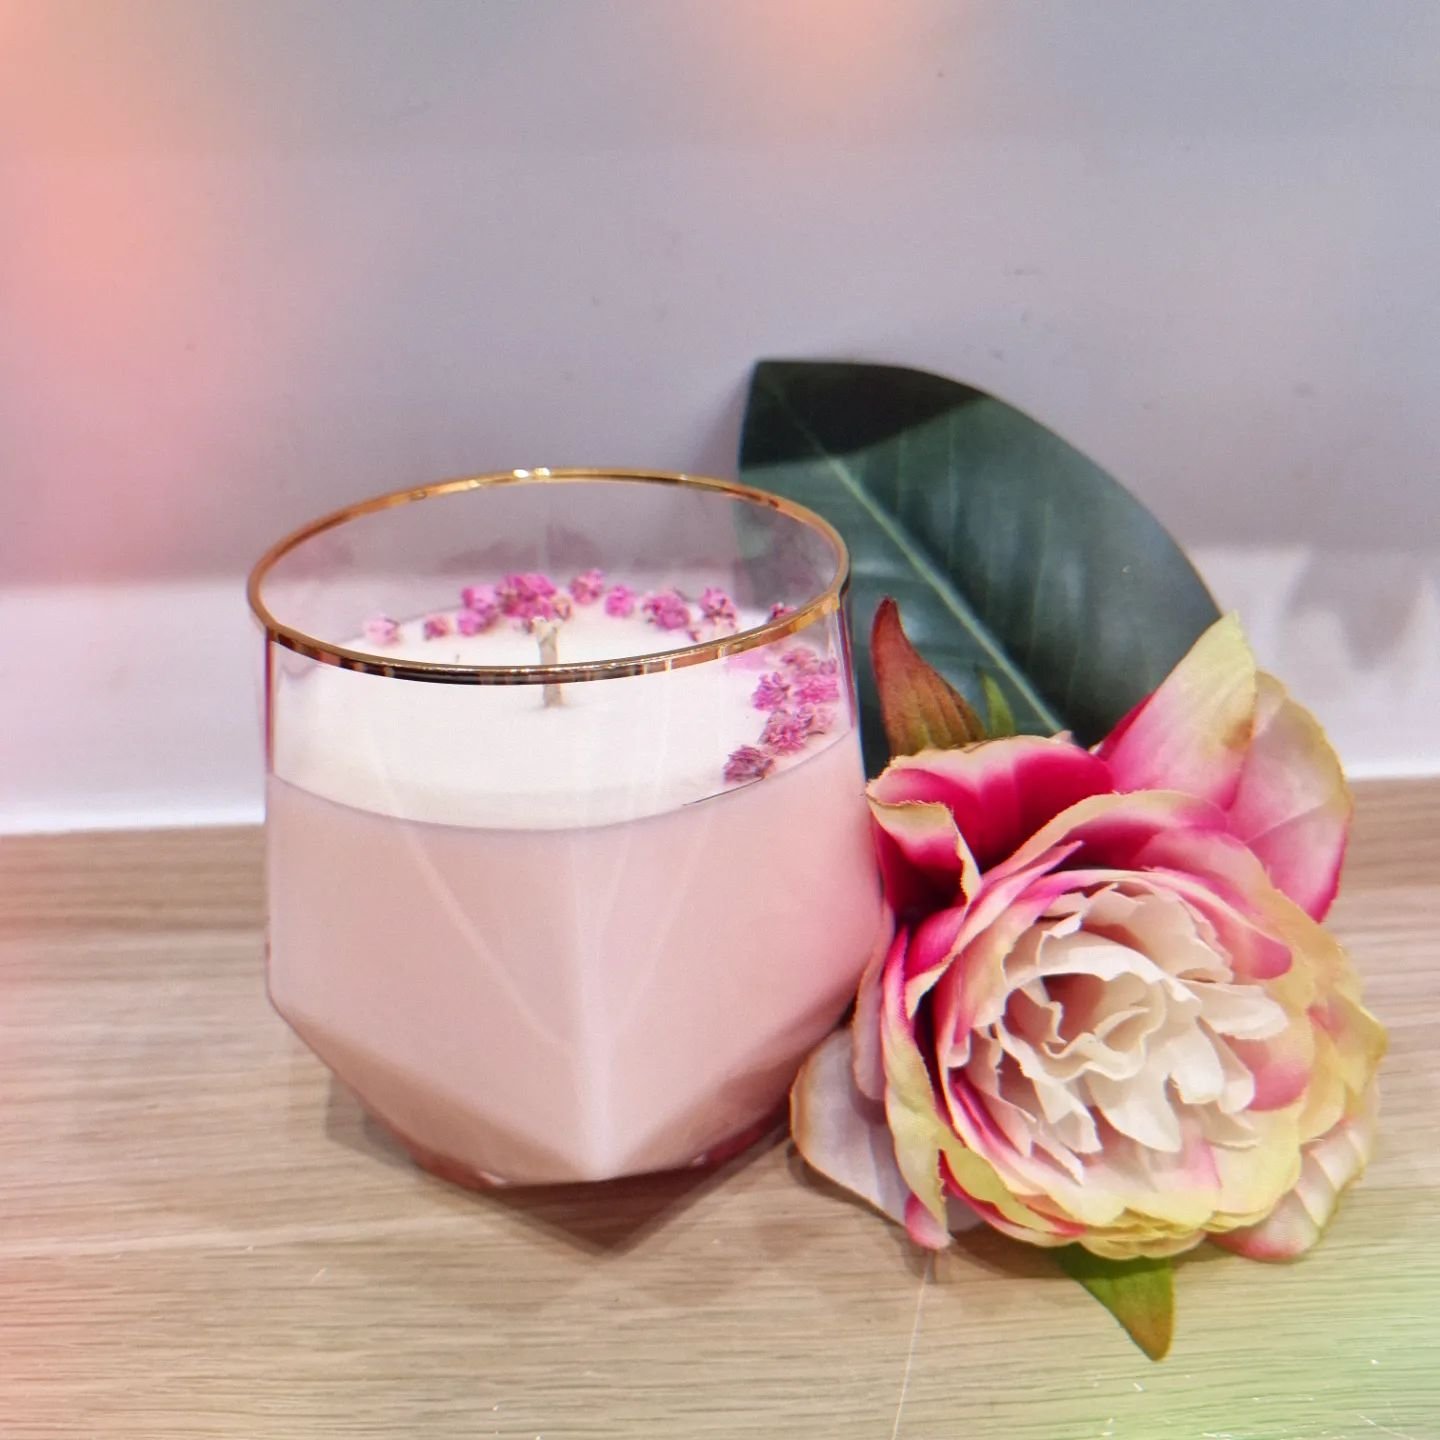 We have new candles in stock just in time for Mother's day 💐 
Locally made, small batch, coco soy blend. 
$29.95
Fragrances include- 
Watermelon 🍉 
Flower bomb 🌸
Kakadu plum 🇦🇺
Vanilla caramel 🍬
French pear 🍐